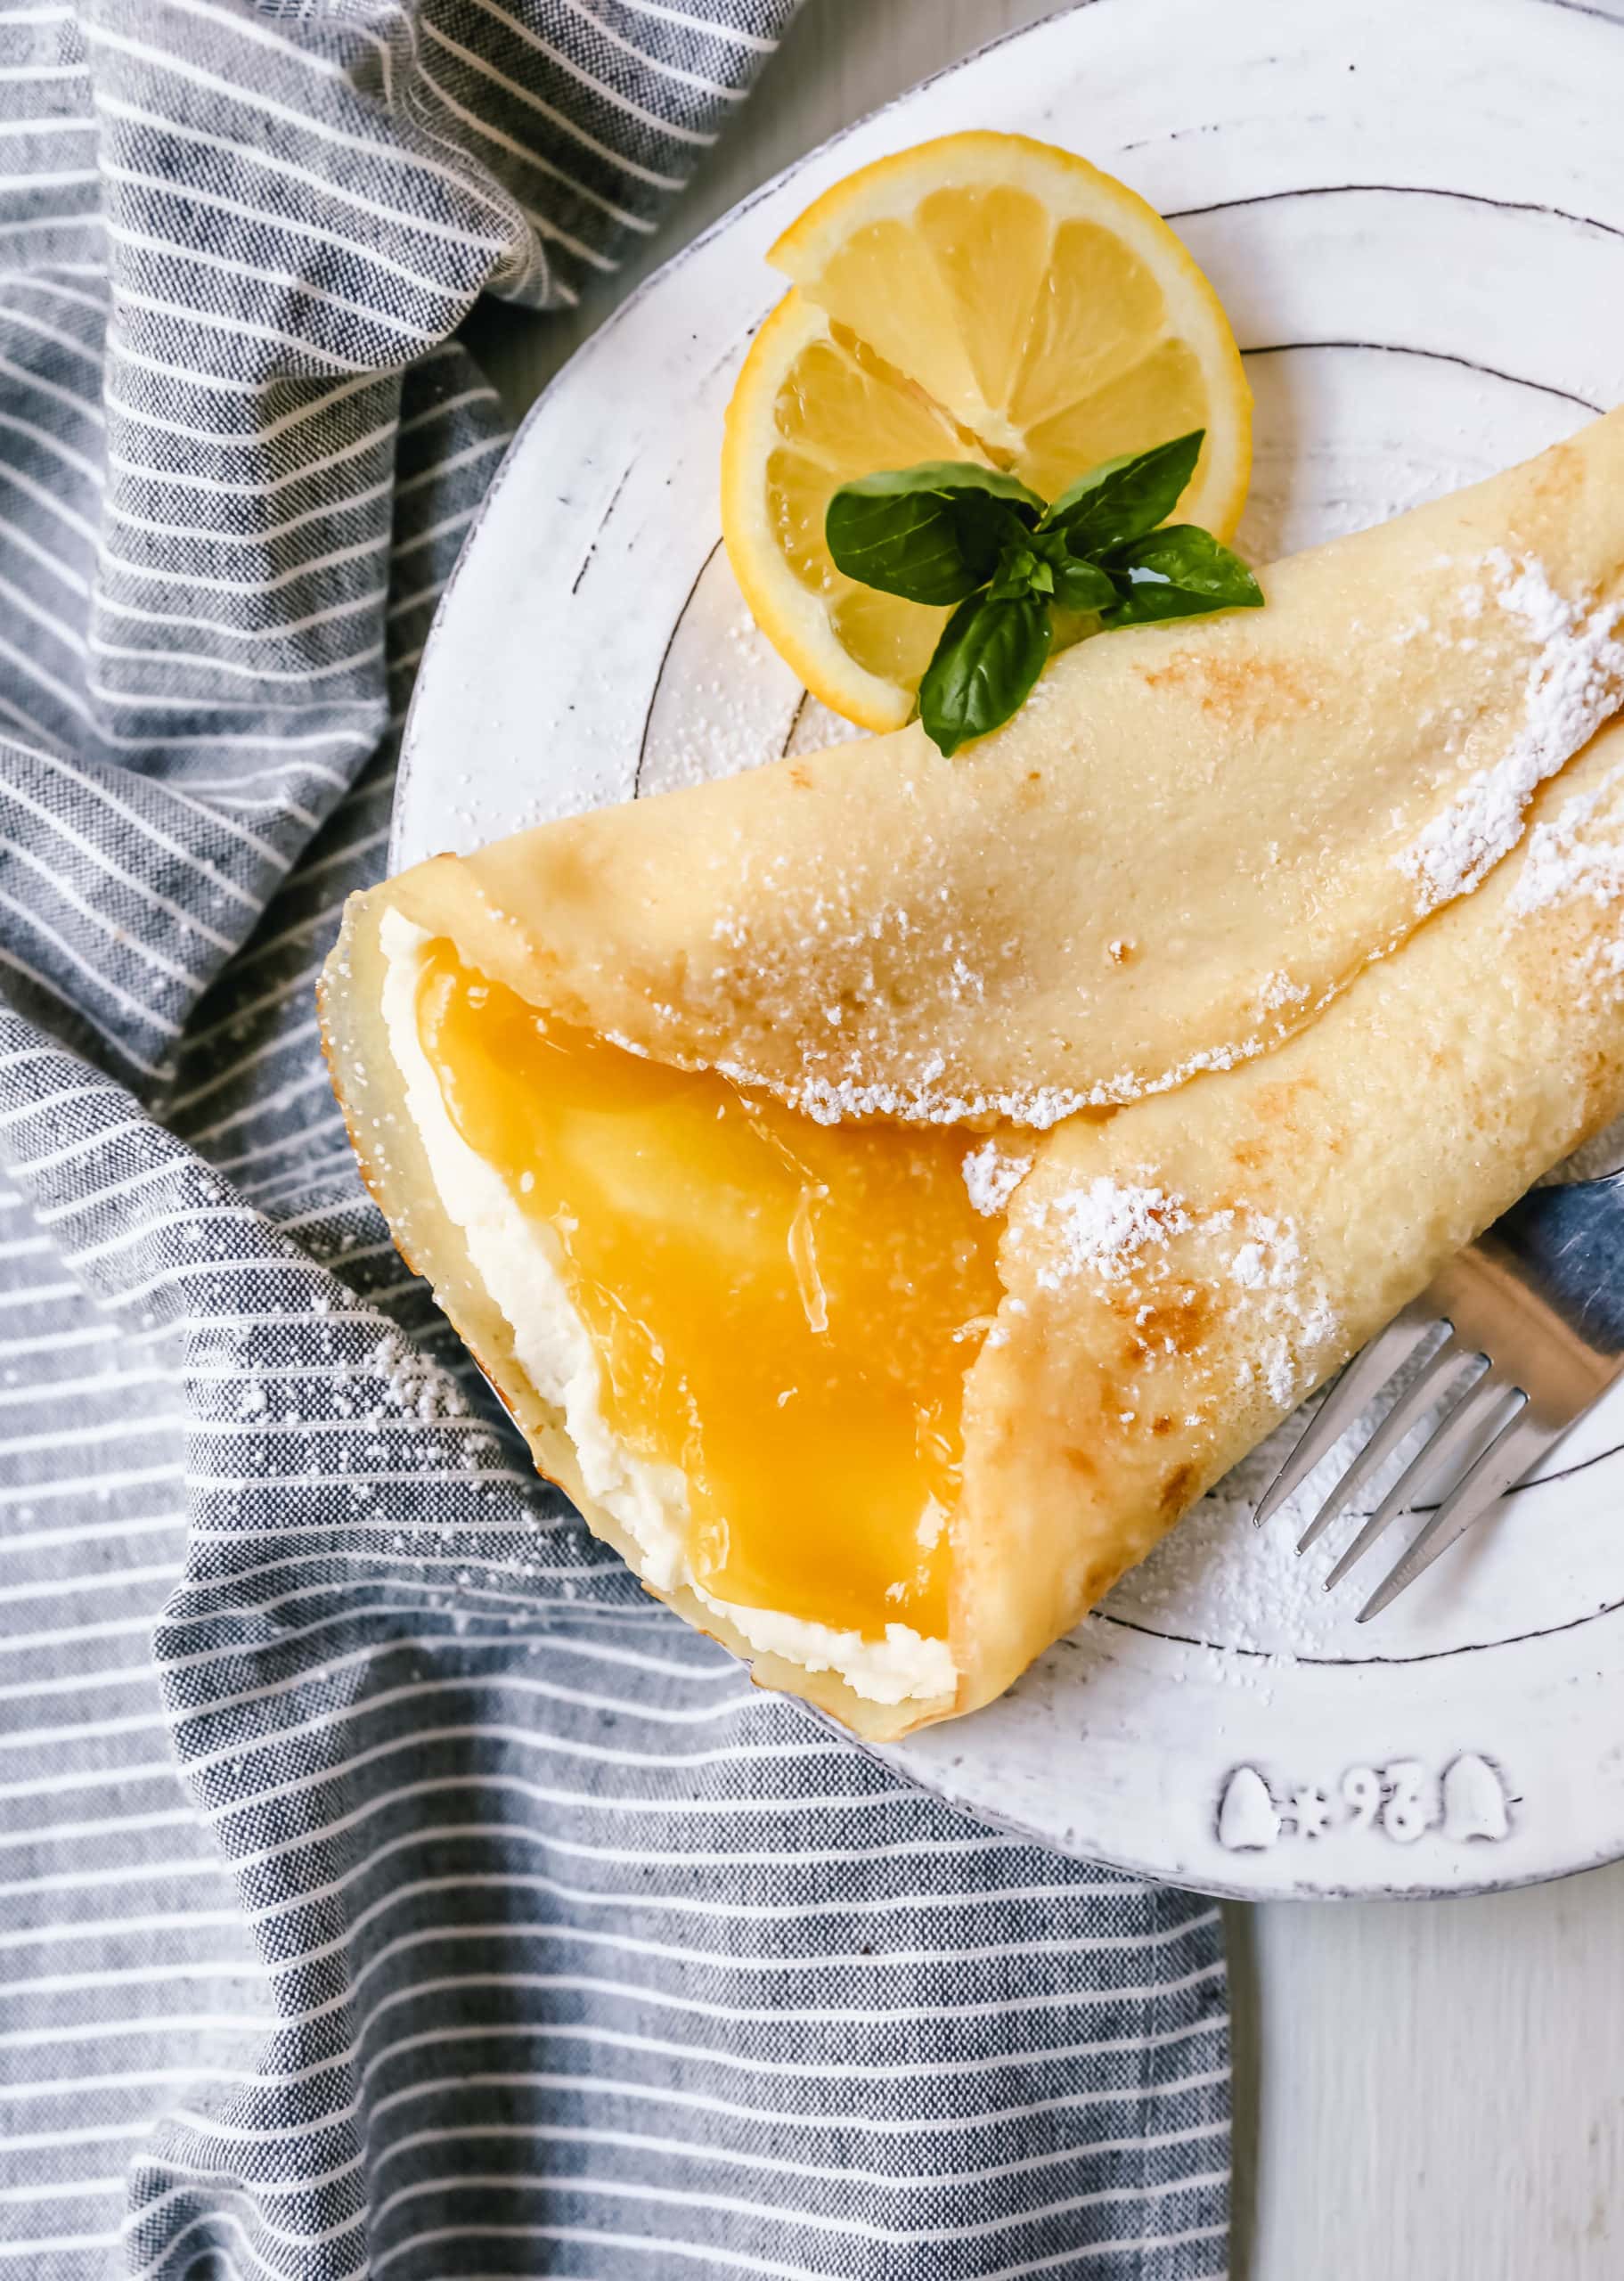 The Best Crepes Recipe. An easy homemade crepe recipe made with simple ingredients -- milk, flour, eggs, sugar, water, and butter. Simple 6-ingredient crepe recipe!  #crepes #crepe #breakfast